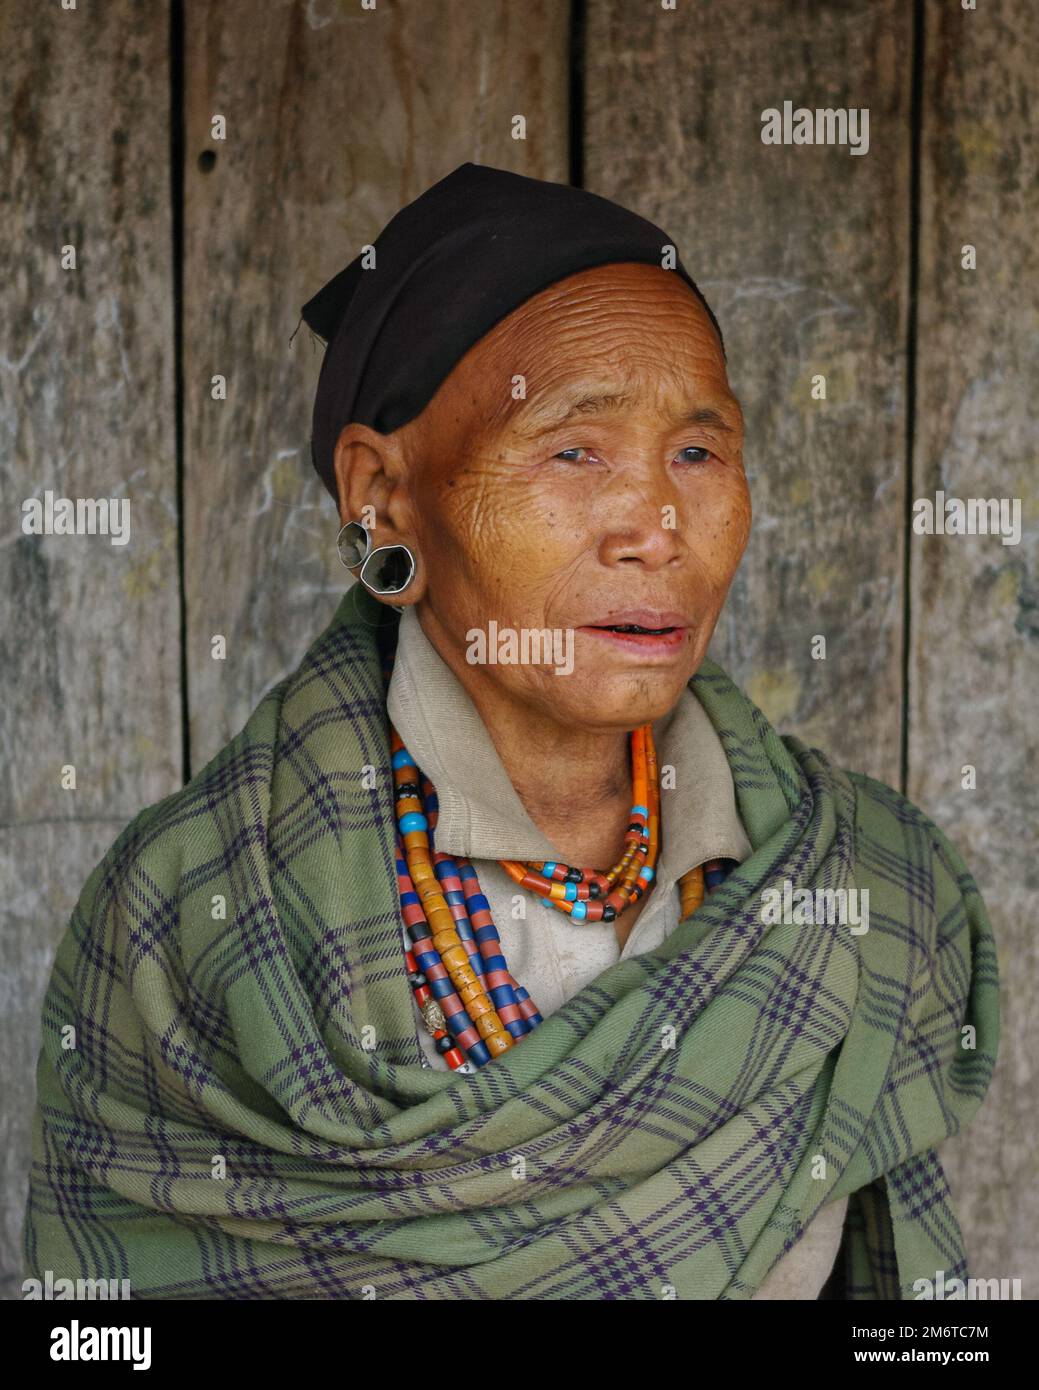 Mon, Nagaland, India - 03 03 2009 : Portrait of old ethnic Naga woman wearing green plaid, traditional necklace and black scarf on wooden background Stock Photo